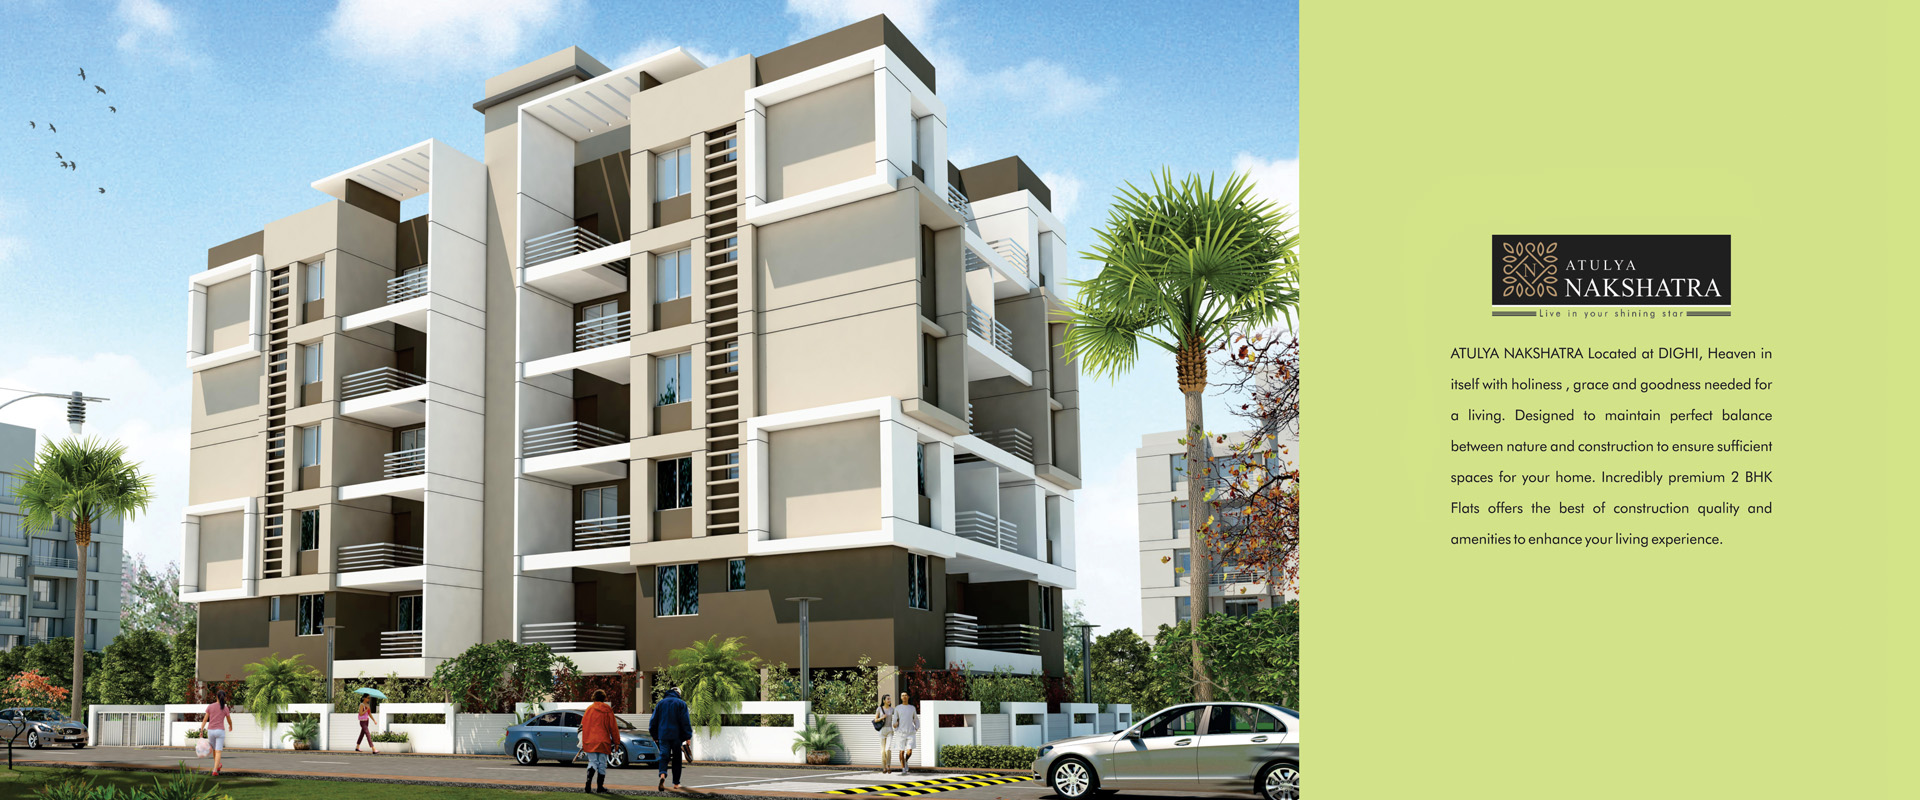 2 BHK flats in dighi